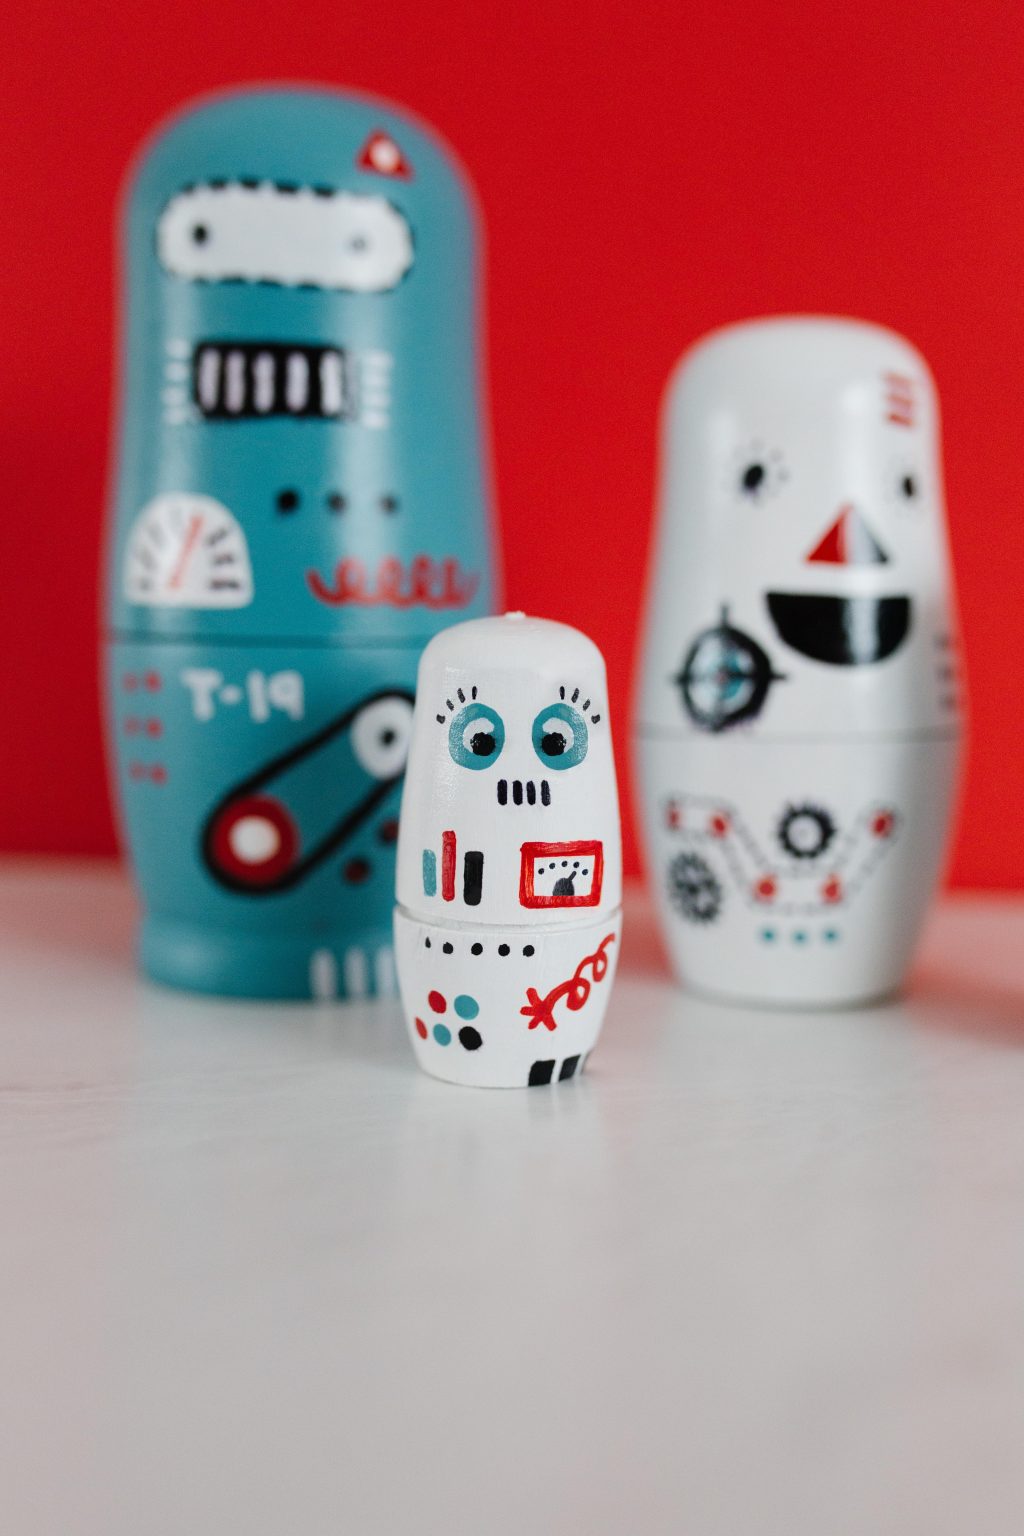 DIY Robot Nesting Dolls Tutorial + featured by Top US Craft Blog + The Pretty Life Girls